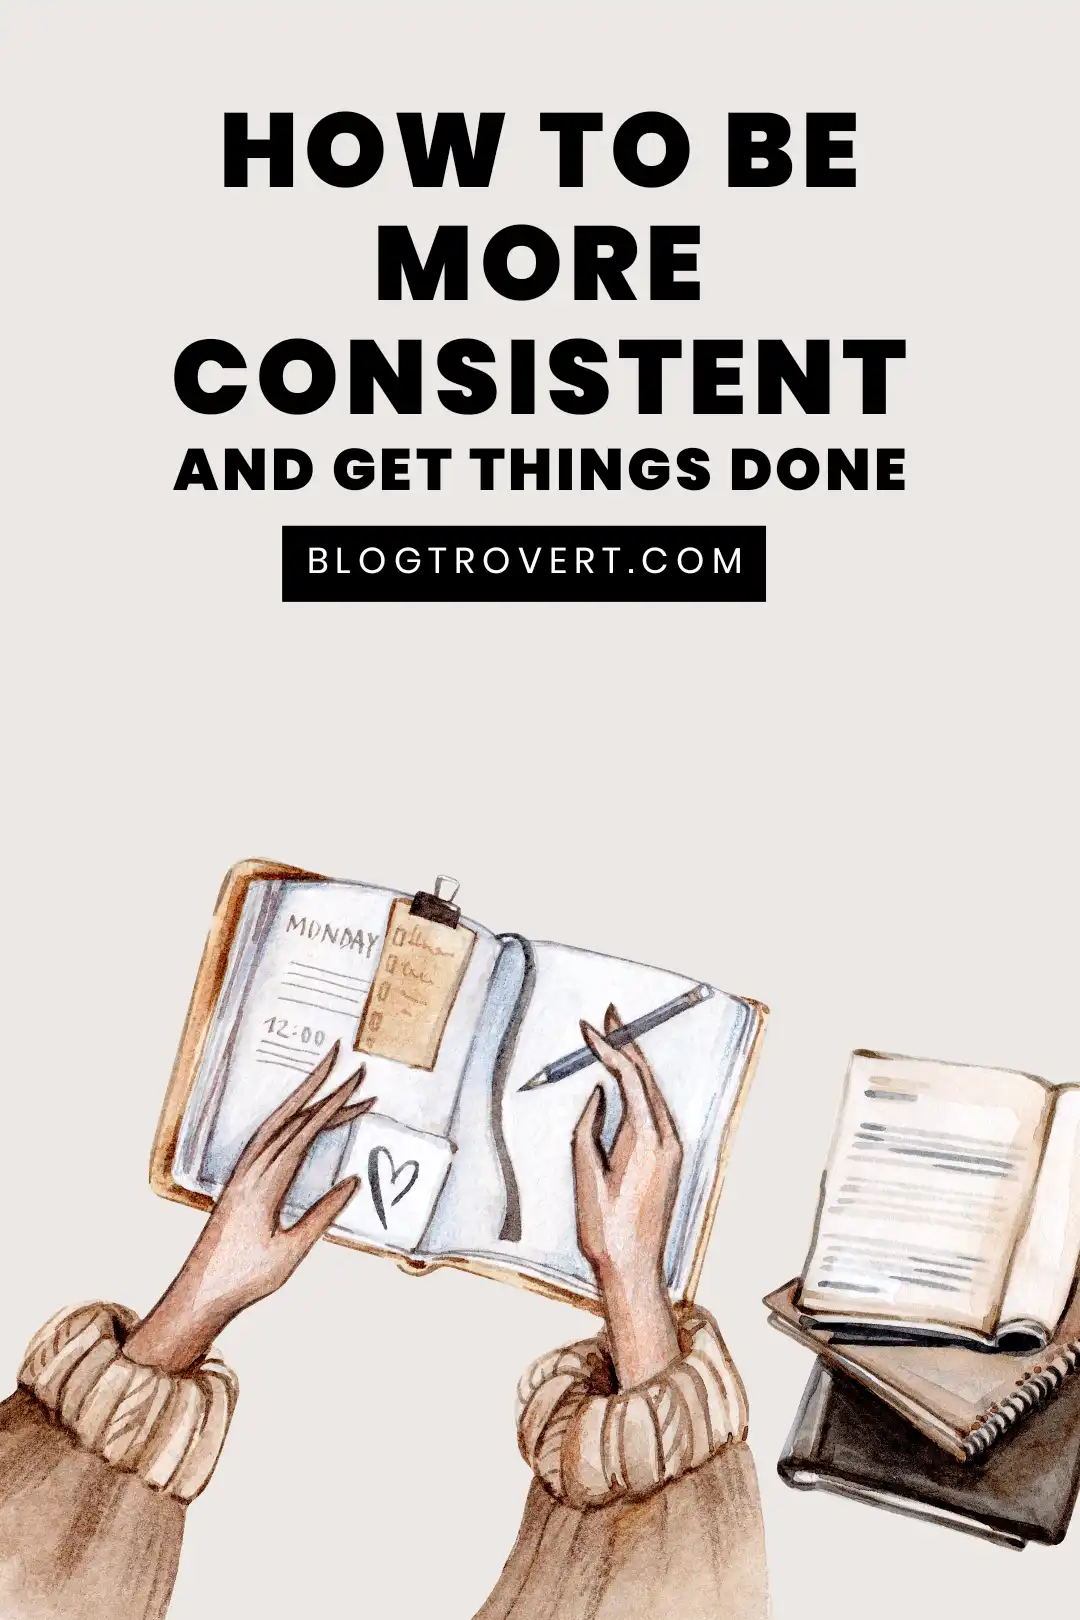 How to be more consistent